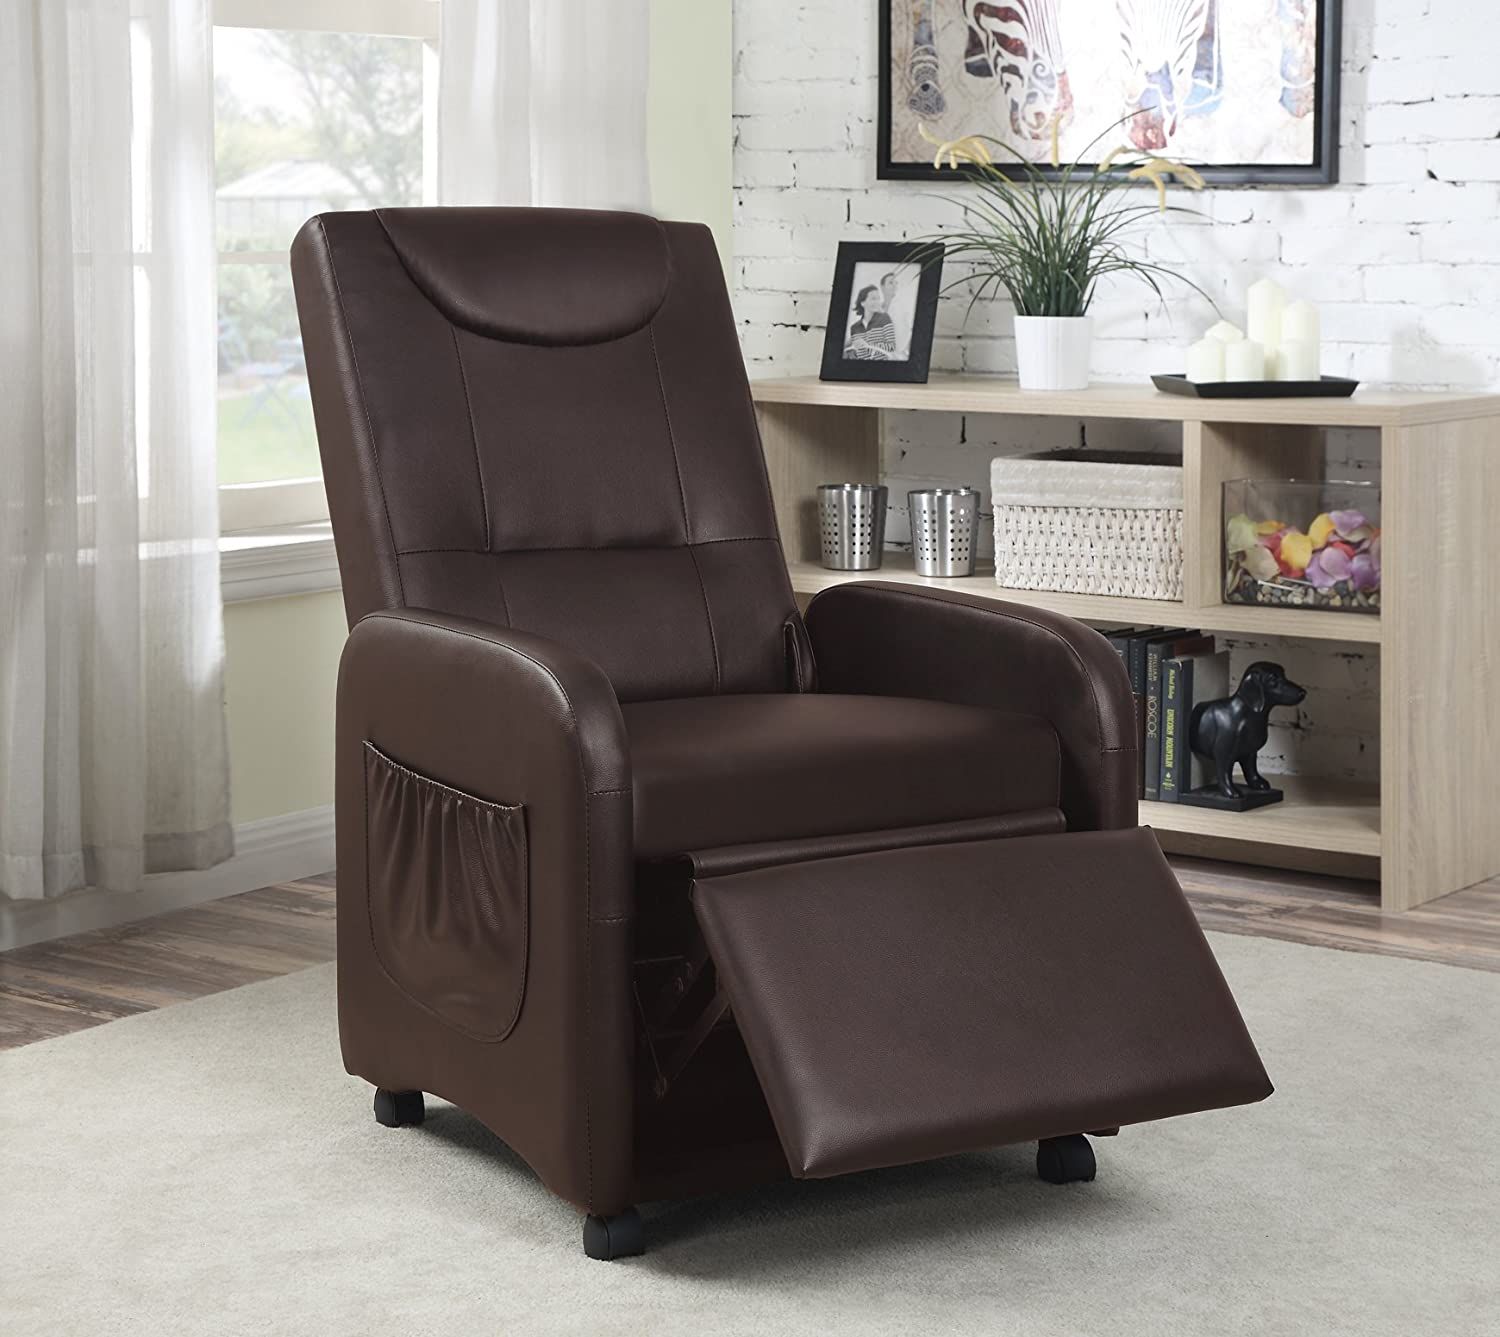 Viscologic Folding Gaming Faux Leather Manual Reclining Living Room Within Medium Brown Leather Folding Stools (View 6 of 20)